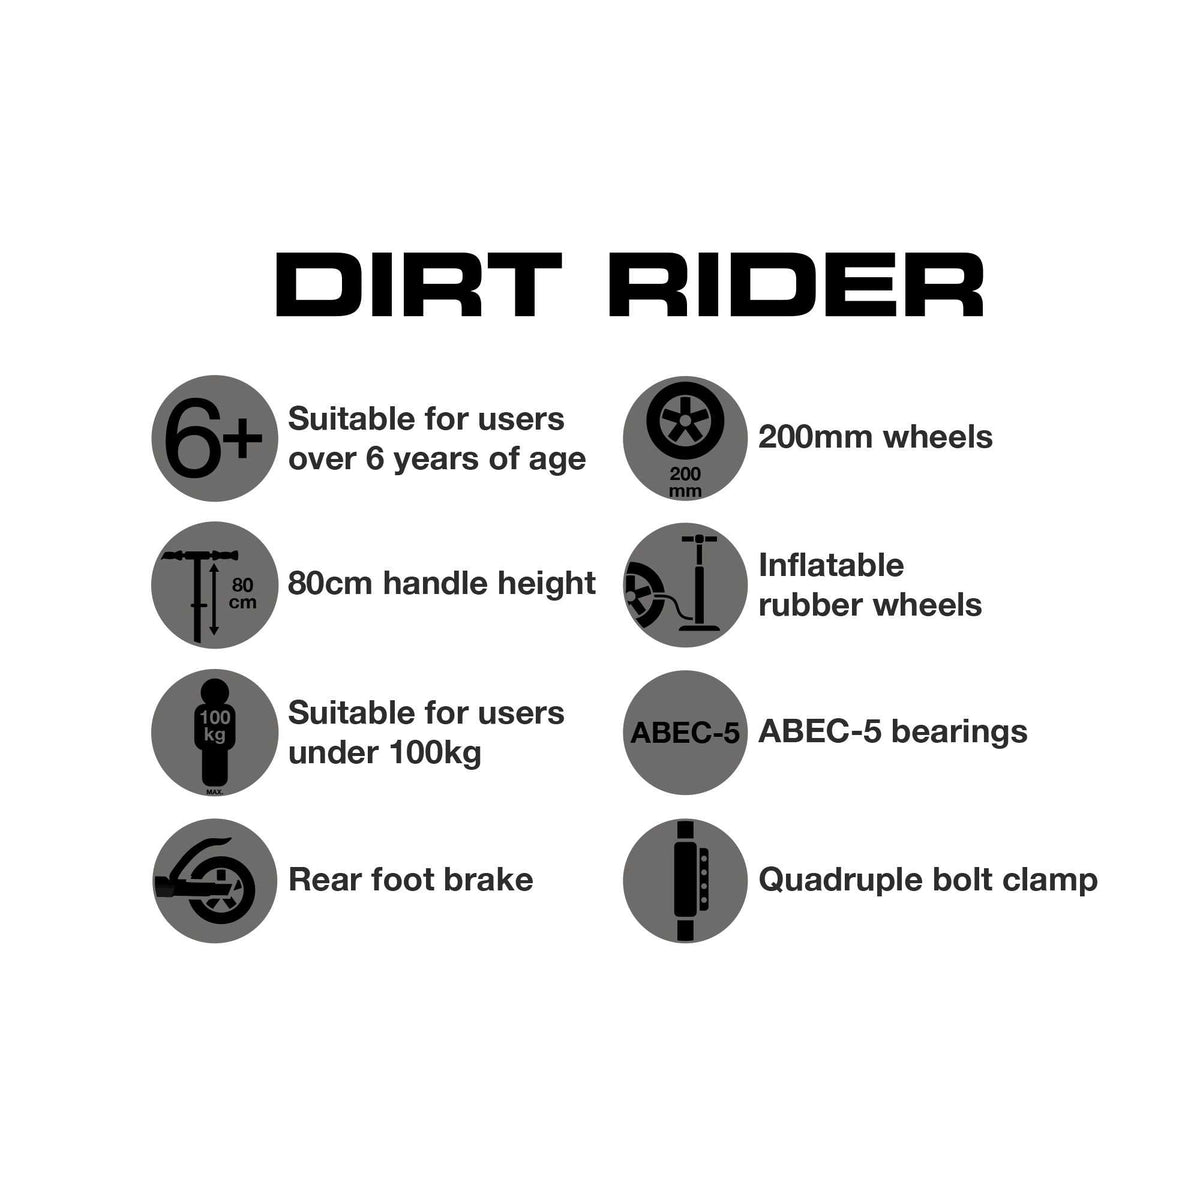 Dirt Rider Scooter, Off-Road Scootering, Trick Scooter, Mud Scooter, Track Scooter, Dirt Scooter, Scooter For 6 Year Olds